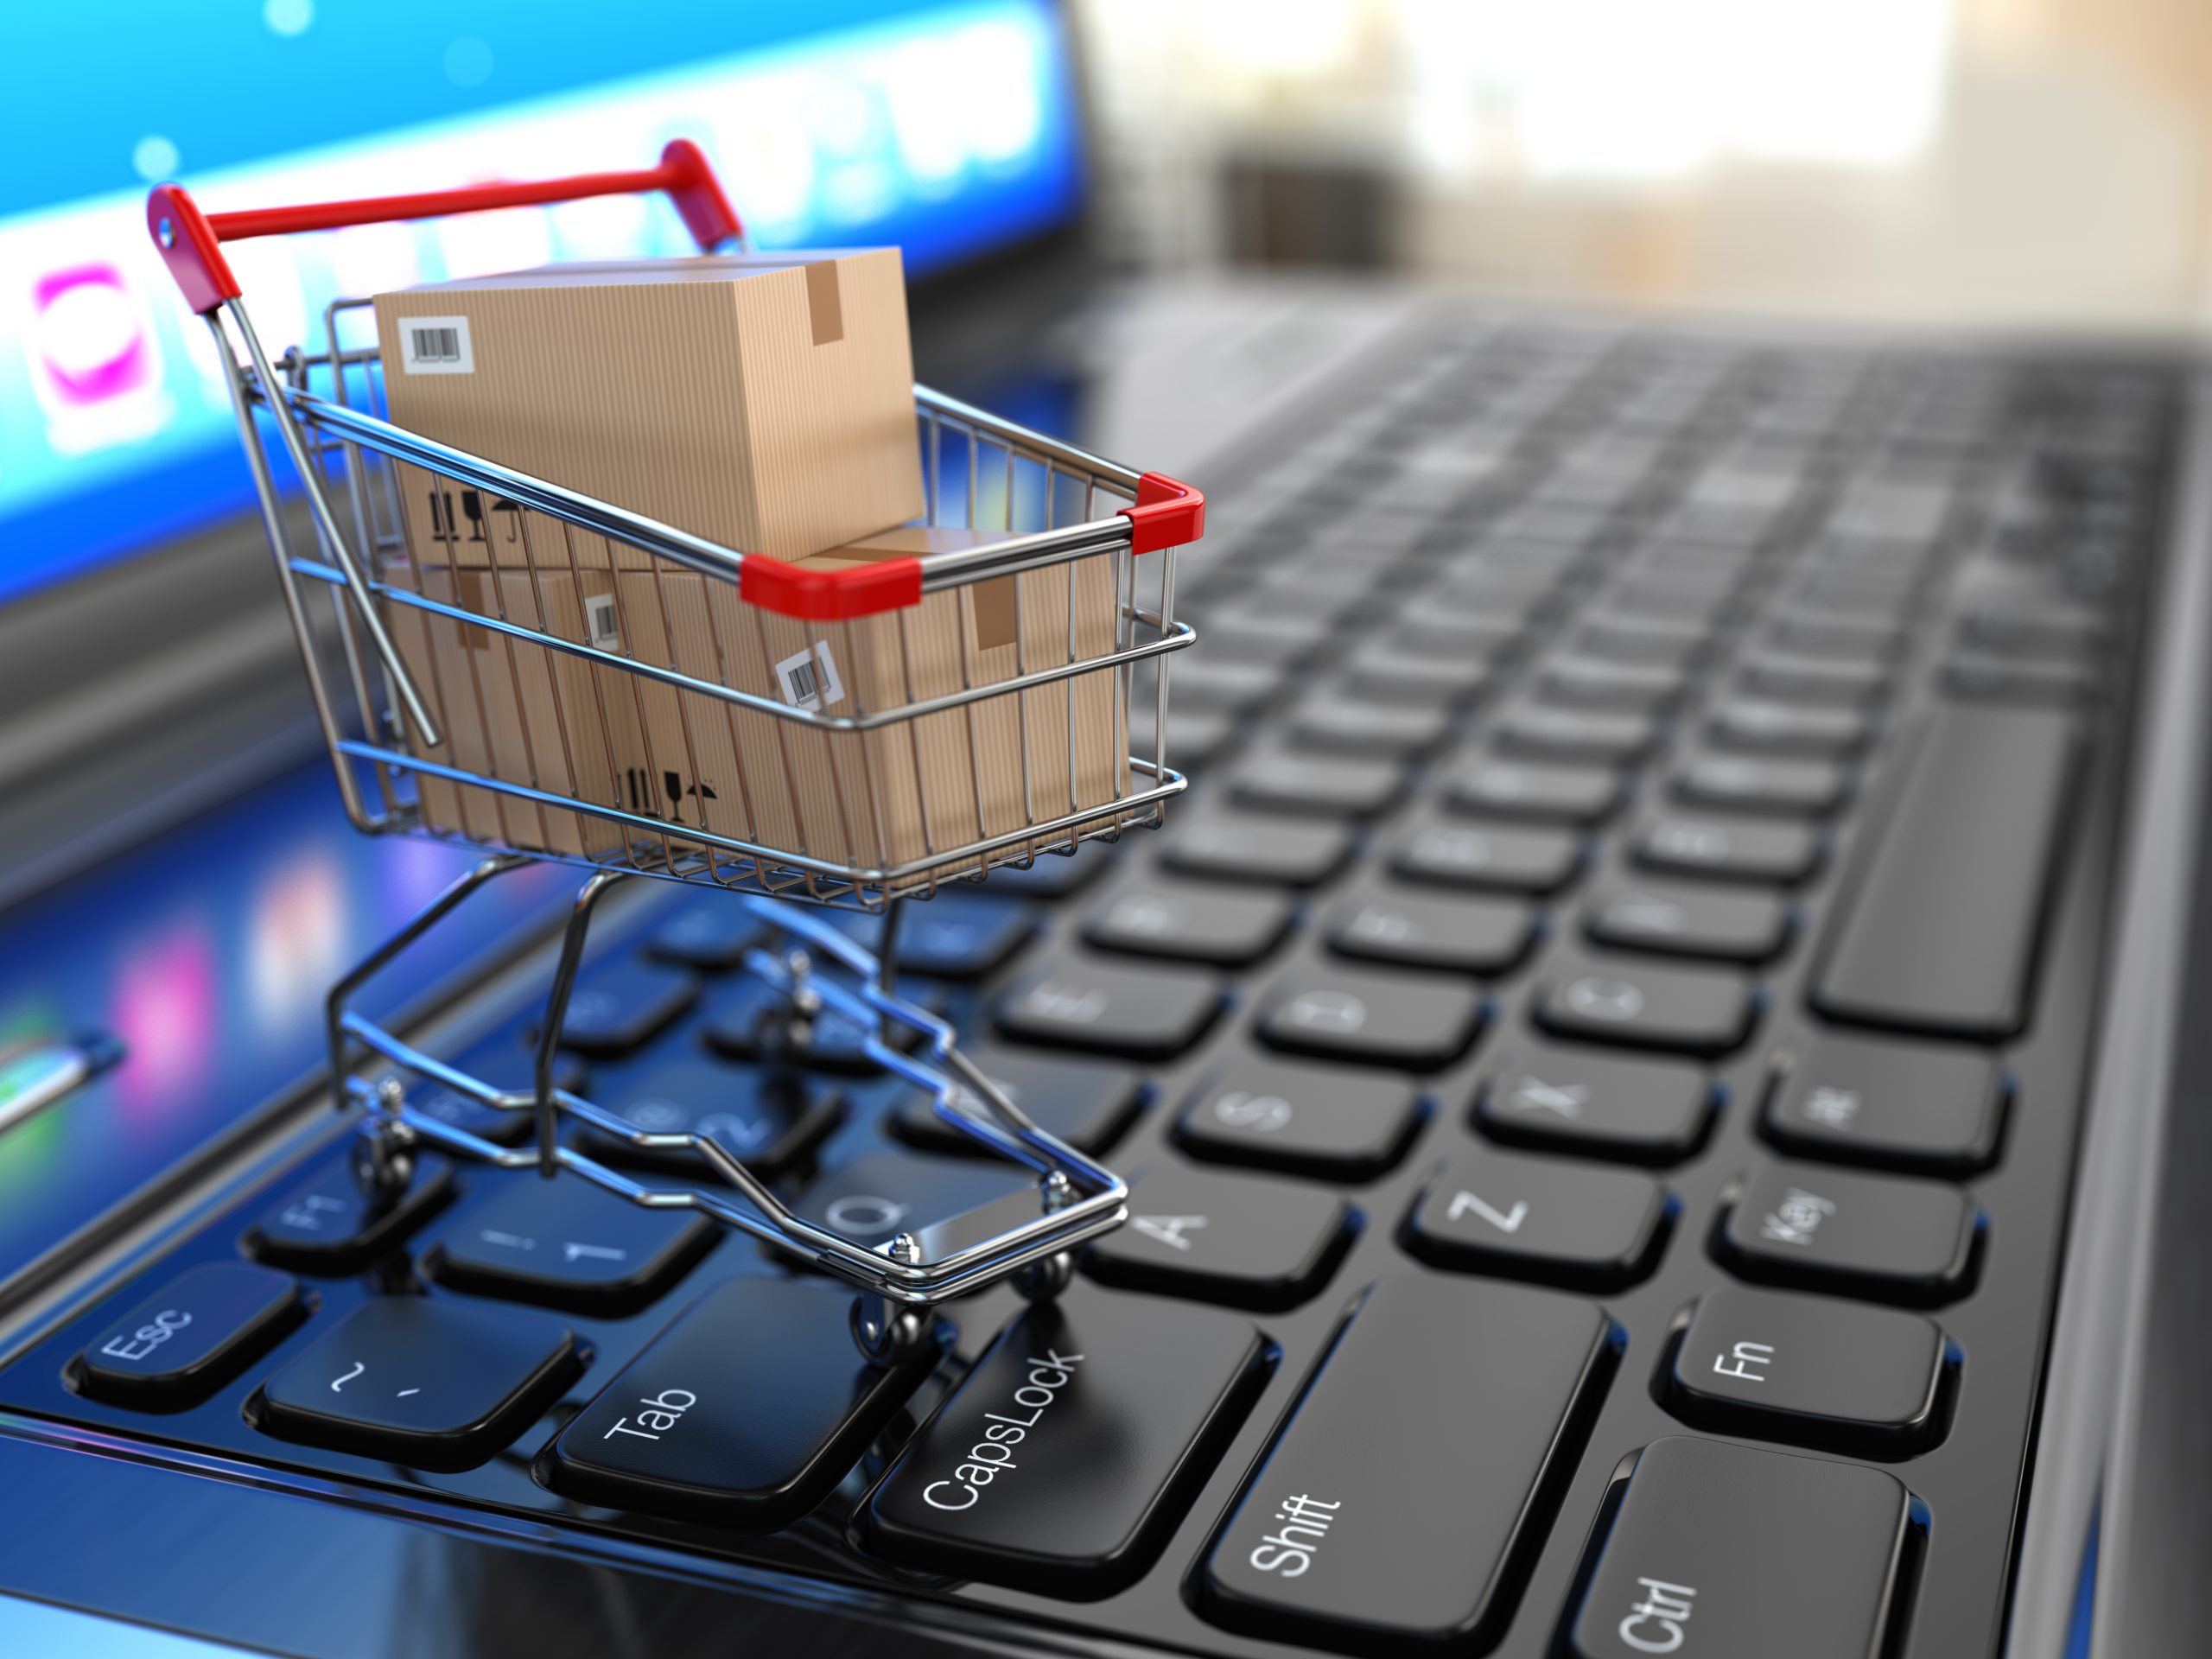 Tiny shopping cart with cardboard boxes on top of laptop keyboard signifying Ecommerce